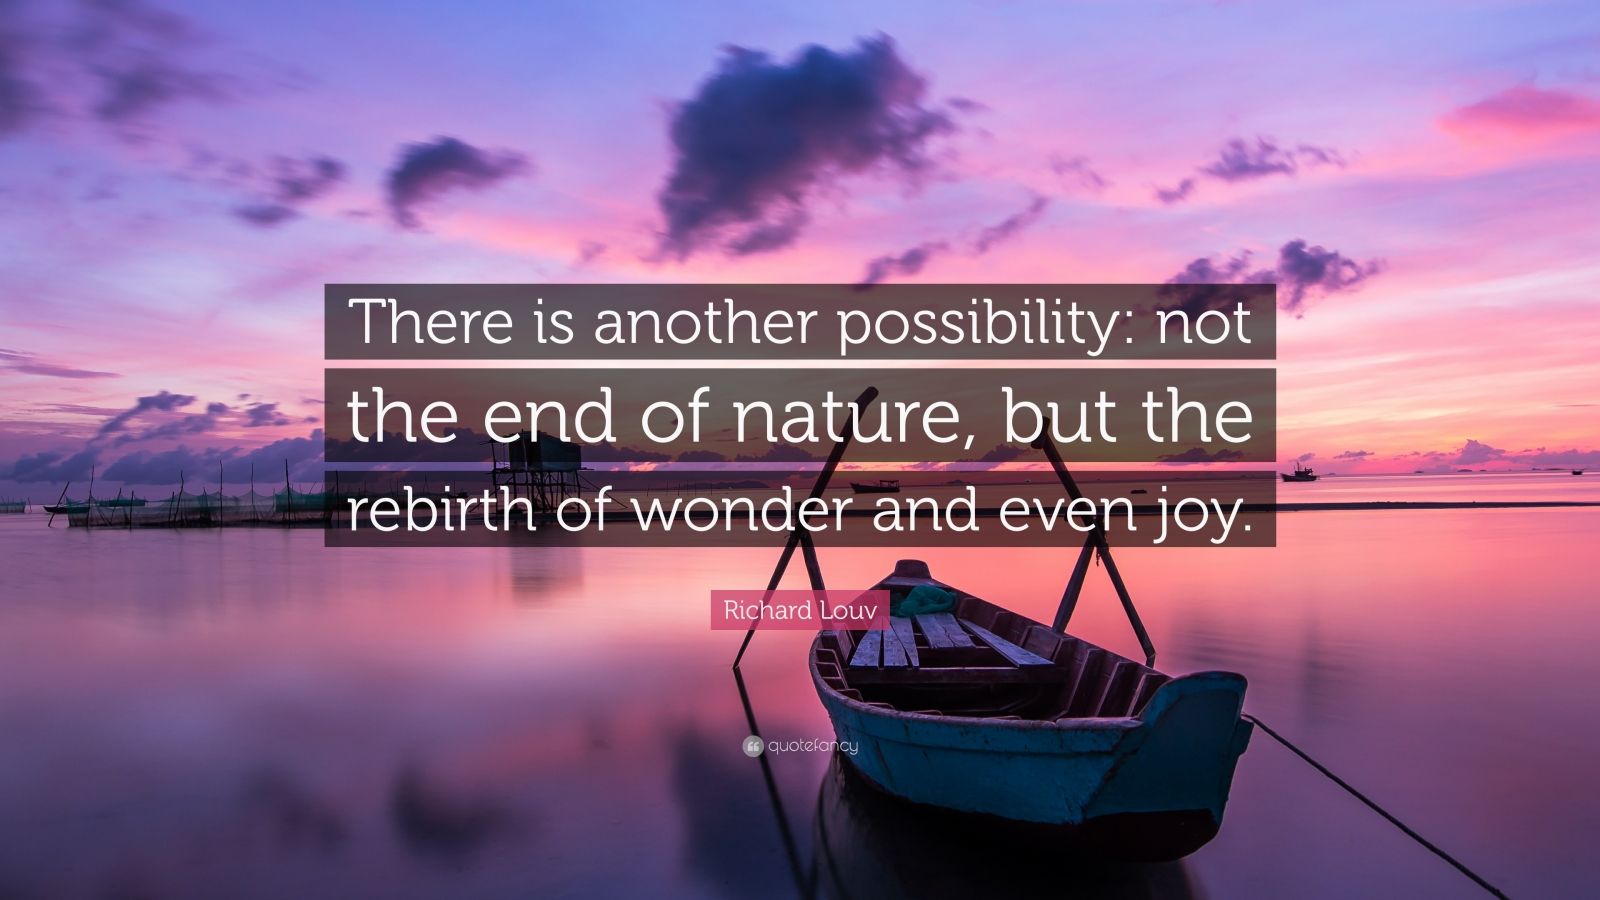 Richard Louv Quote: “There is another possibility: not the end of ...